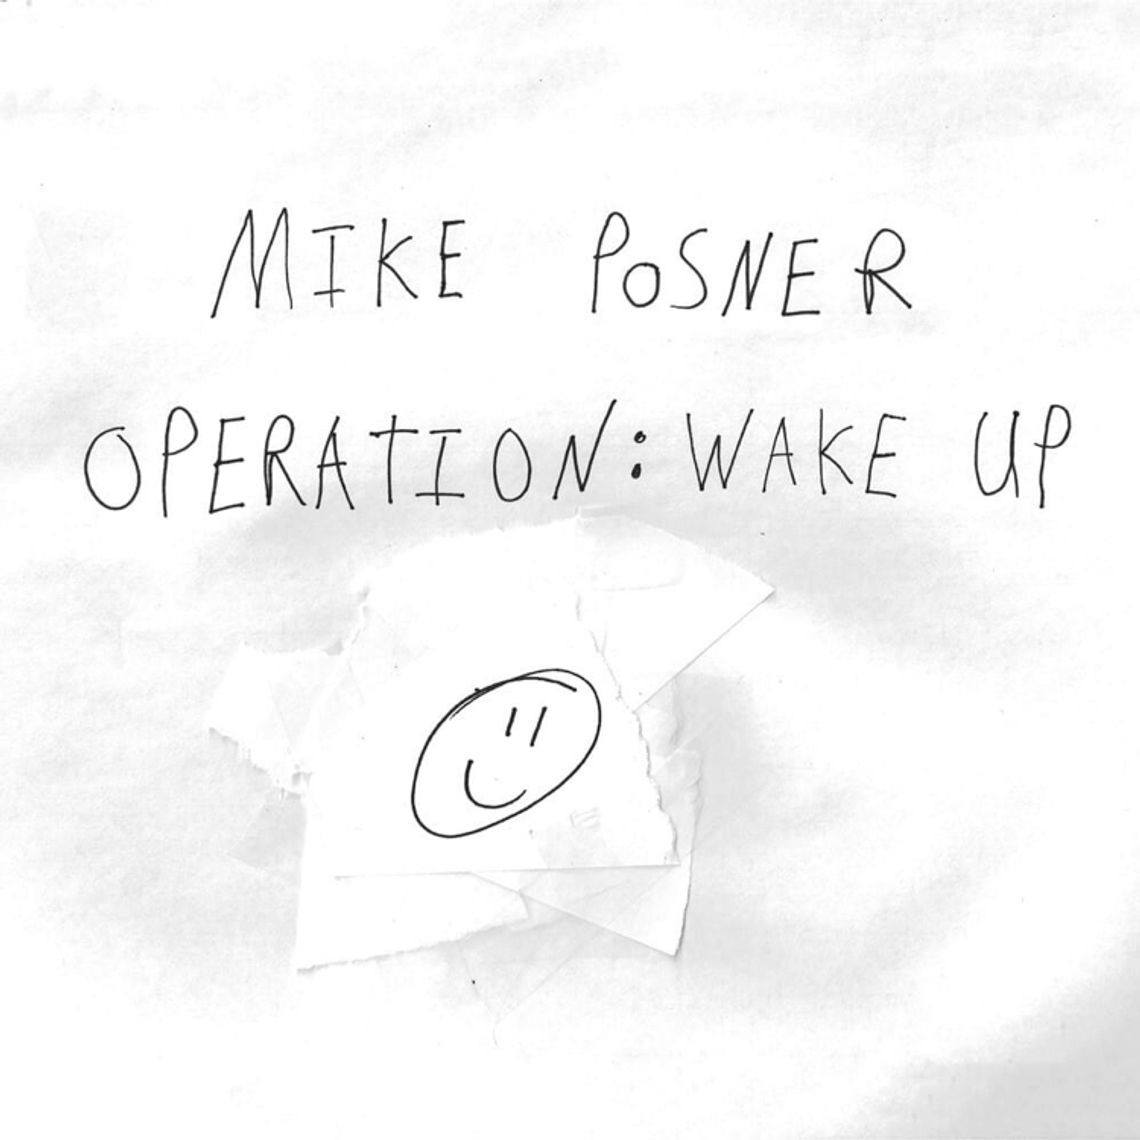 New Year's Reviews -- Operation: Wake Up